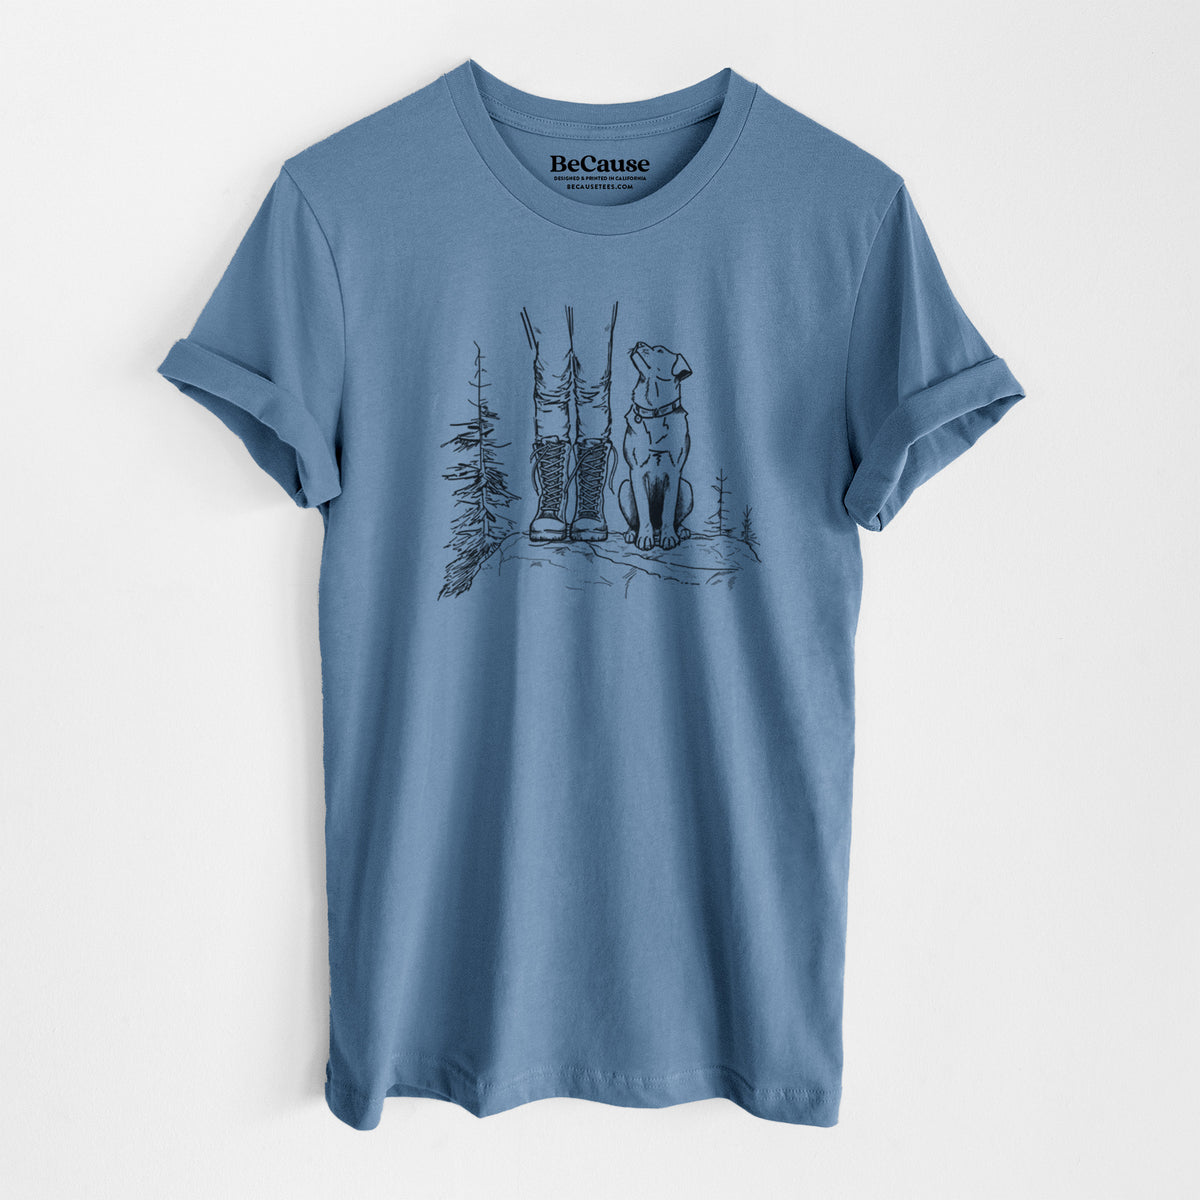 Trail Companions - Hiking with Dogs - Lightweight 100% Cotton Unisex Crewneck